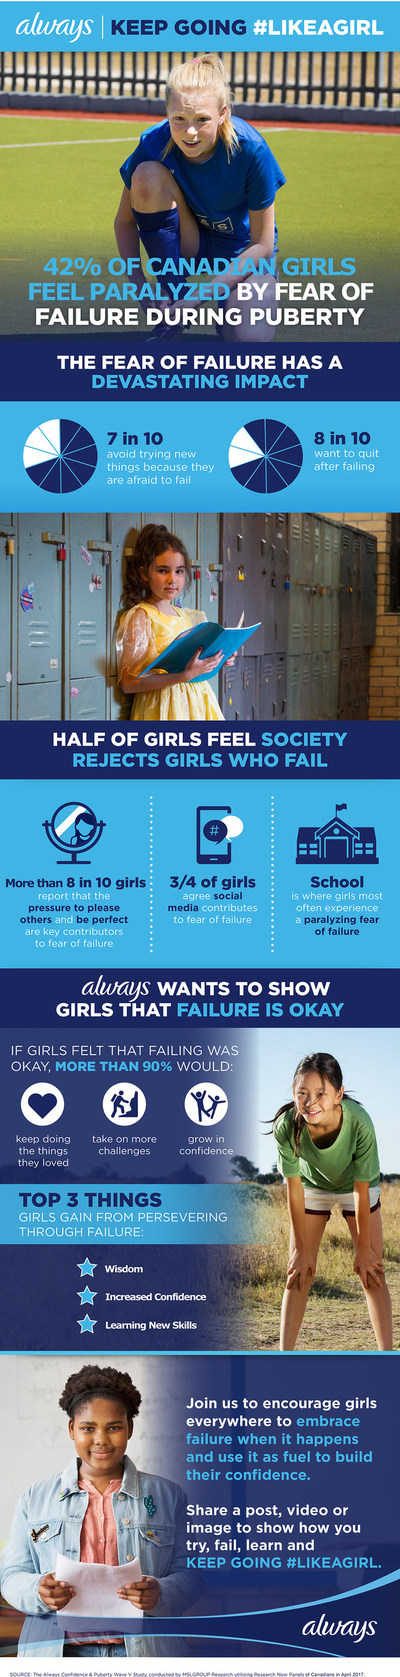 Always #LikeAGirl - Keep Going Infographic (CNW Group/P&G Always)